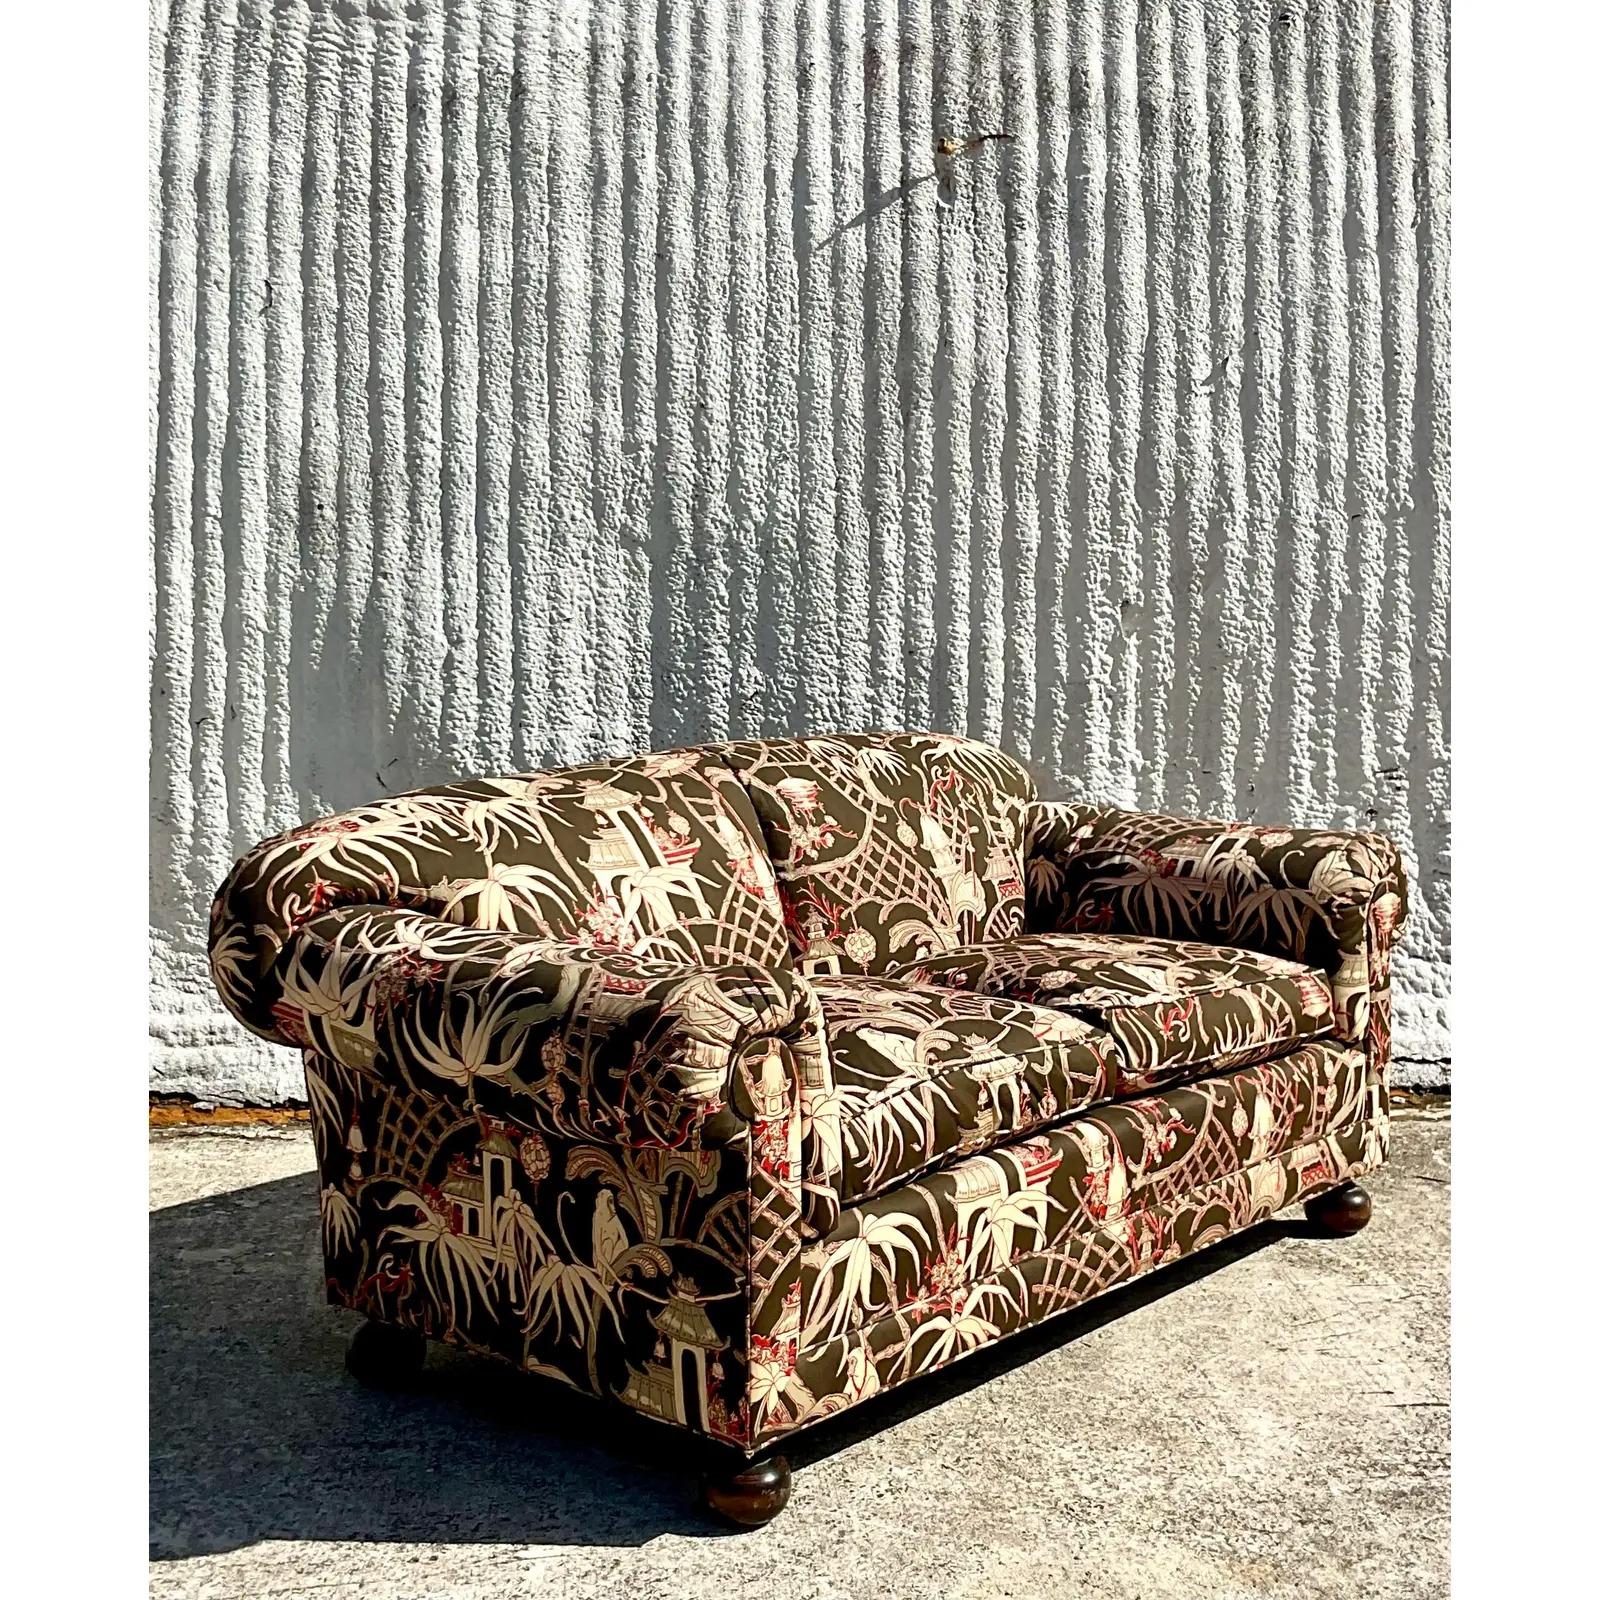 An incredible vintage Boho roll arm sofa. A beautiful Chinoiserie print in chocolate brown and persimmon. Two matching sofas available. Acquired from a Palm Beach estate.